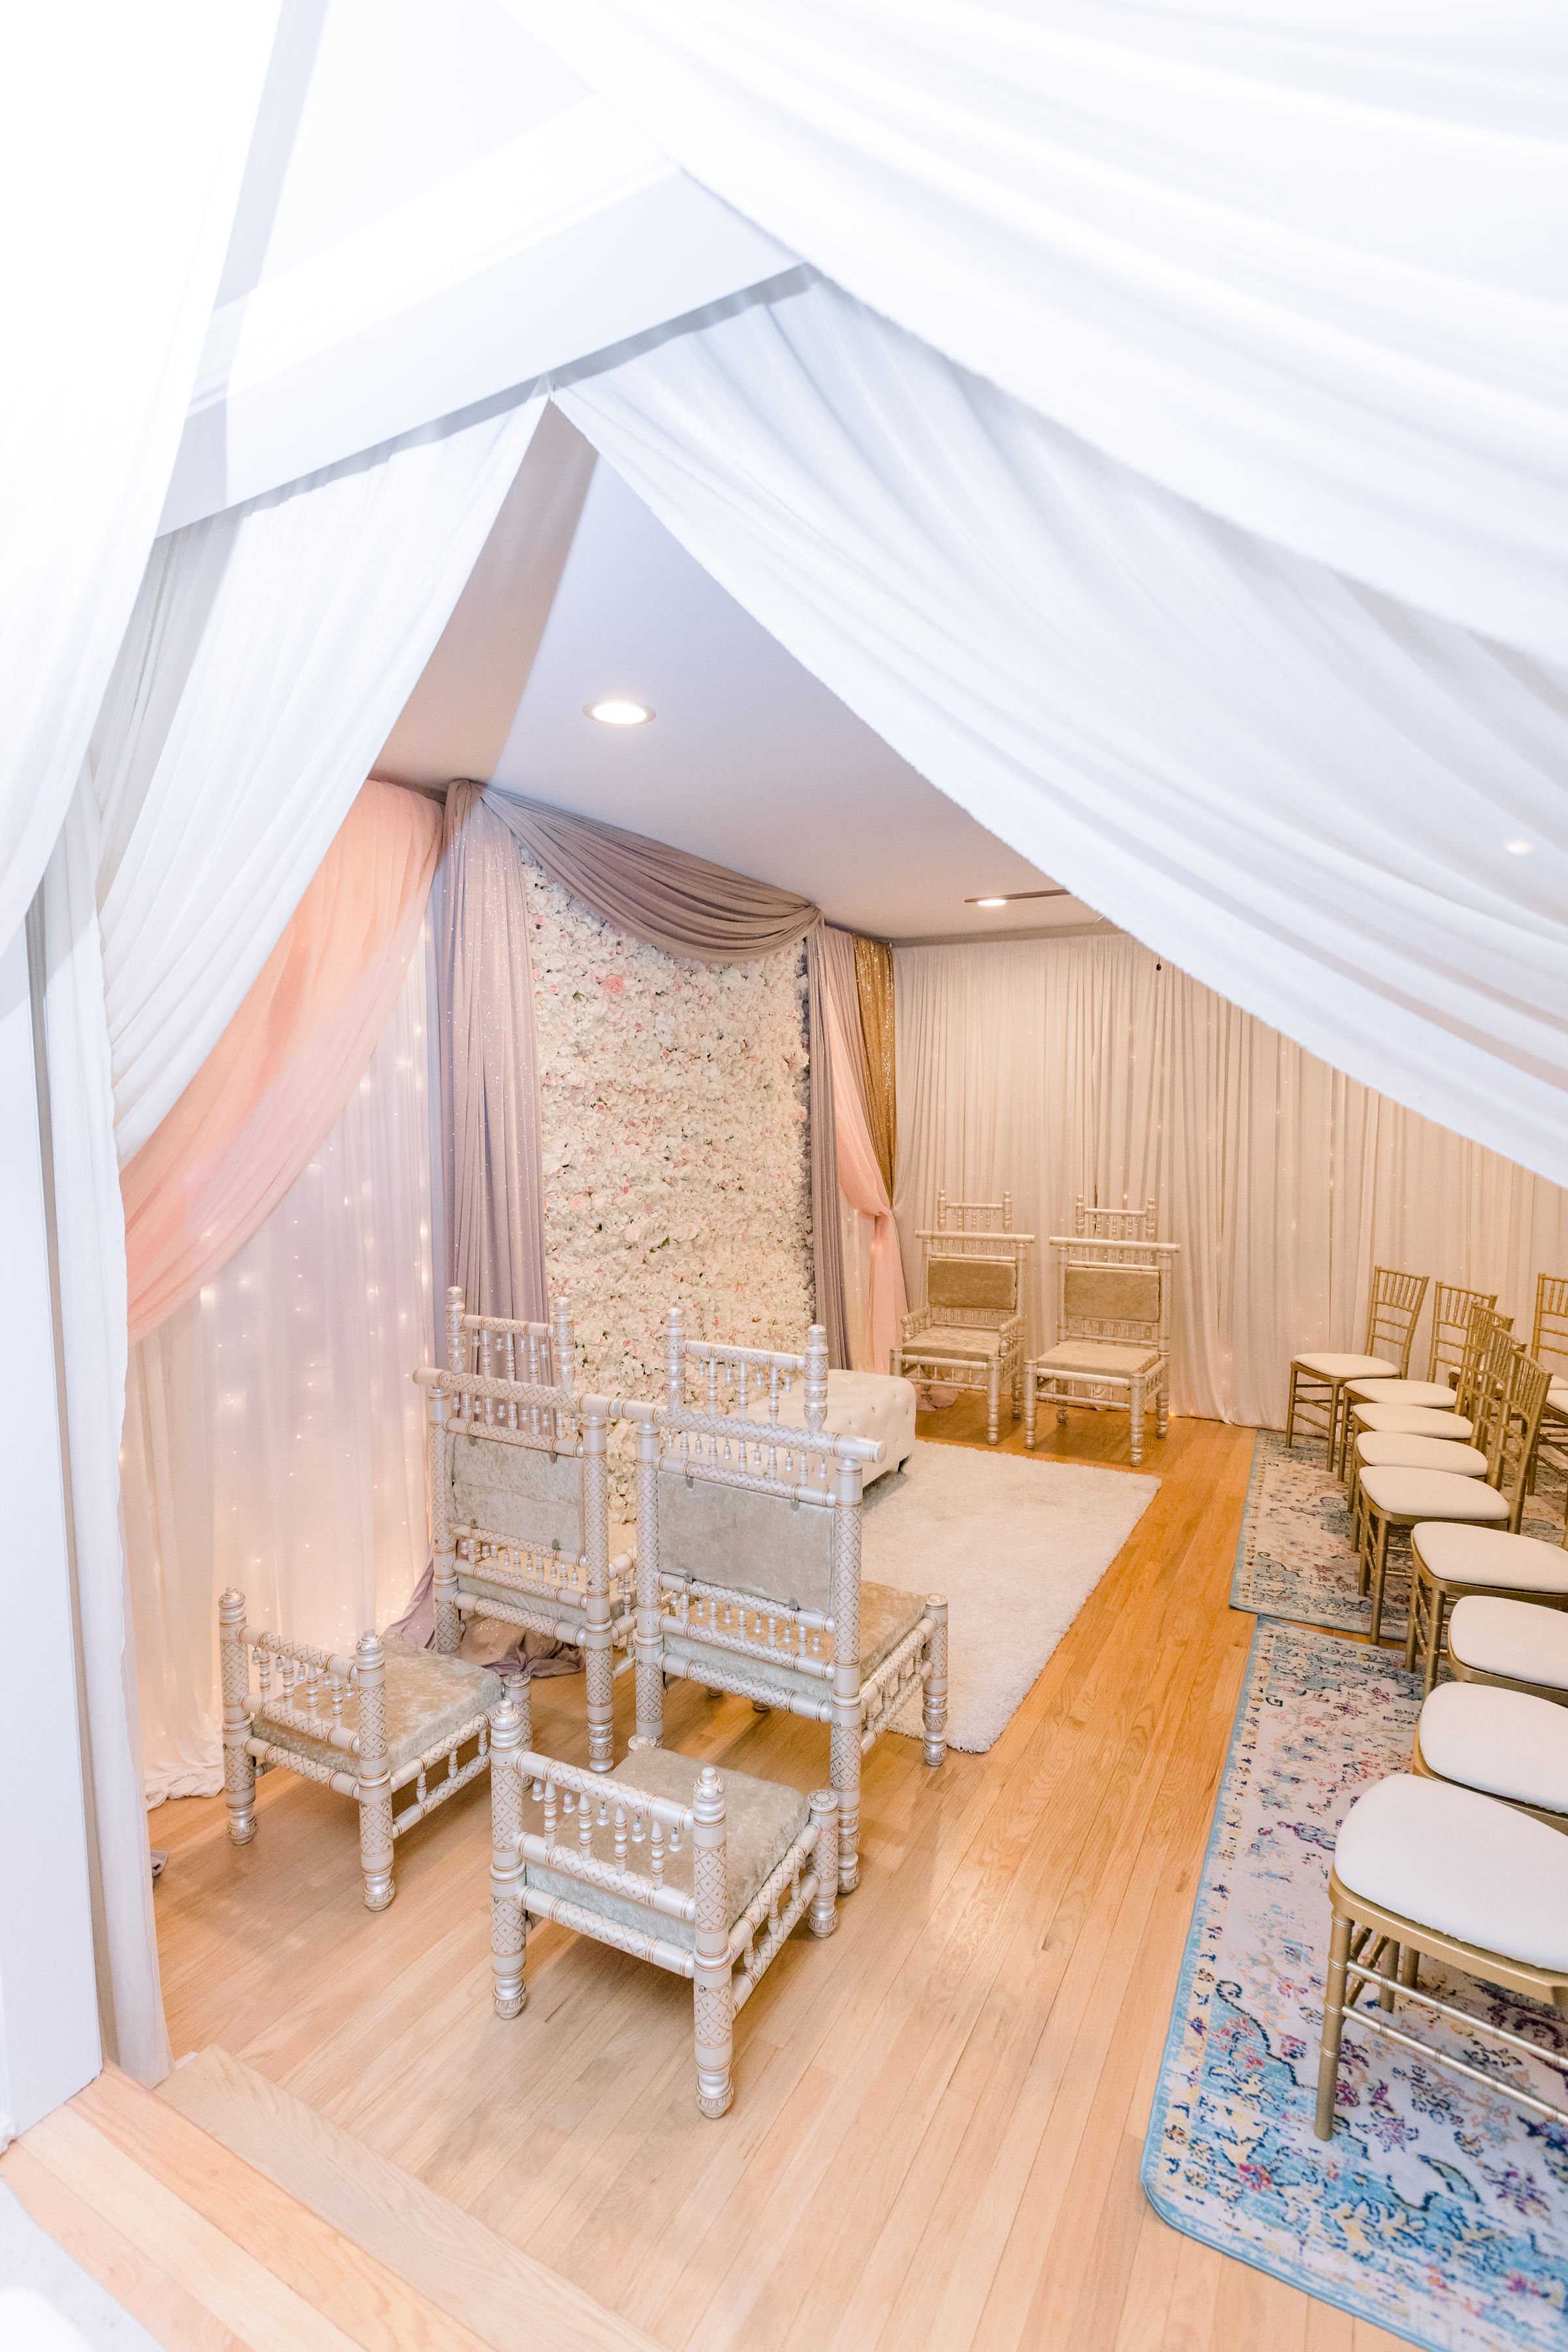 Basement wall draping wedding in the living room garage wall draping intimate wedding at home micro wedding event in chicago chiavari chairs table ren (7).jpg